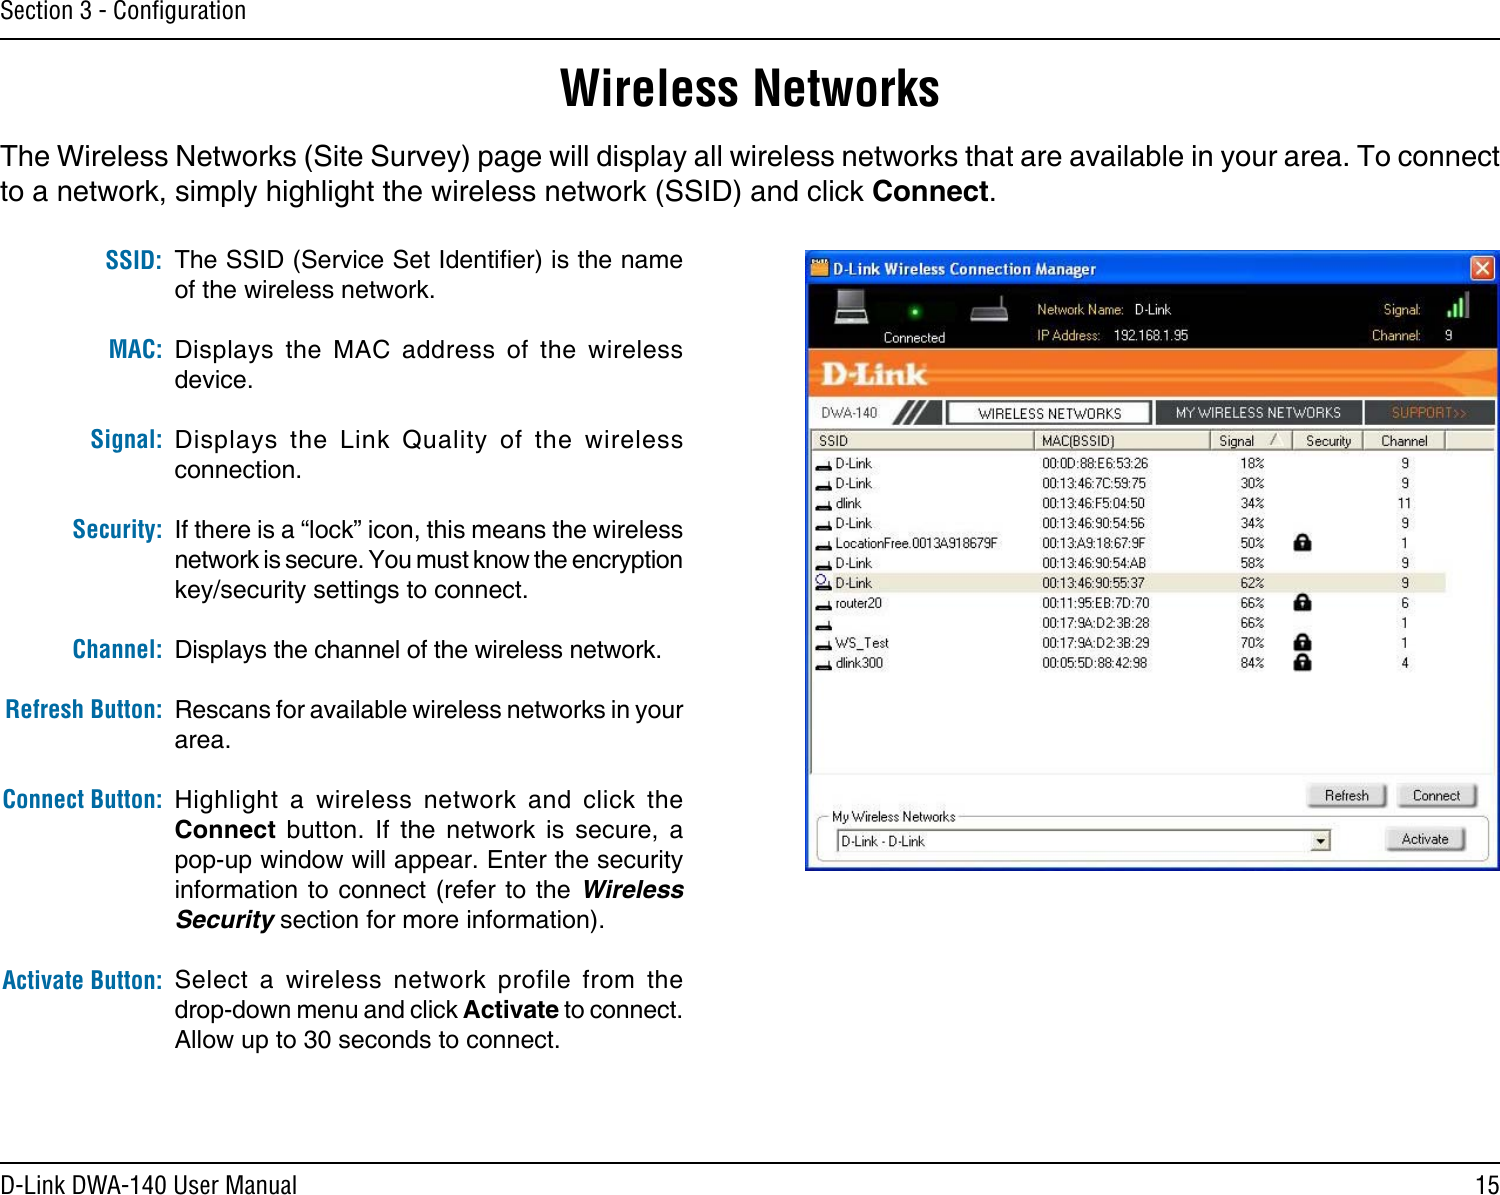 15D-Link DWA-140 User ManualSection 3 - ConﬁgurationWireless NetworksThe SSID (Service Set Identier) is the name of the wireless network.Displays  the  MAC  address  of  the  wireless device.Displays  the  Link  Quality  of  the  wireless connection. If there is a “lock” icon, this means the wireless network is secure. You must know the encryption key/security settings to connect.Displays the channel of the wireless network.Rescans for available wireless networks in your area.Highlight  a  wireless  network  and  click  the Connect  button.  If  the  network  is  secure,  a pop-up window will appear. Enter the security information to  connect (refer to the  Wireless Security section for more information).Select  a  wireless  network  profile  from  the  drop-down menu and click Activate to connect. Allow up to 30 seconds to connect.MAC:SSID:Channel:Signal:Security:Refresh Button:Connect Button:Activate Button:The Wireless Networks (Site Survey) page will display all wireless networks that are available in your area. To connect to a network, simply highlight the wireless network (SSID) and click Connect.